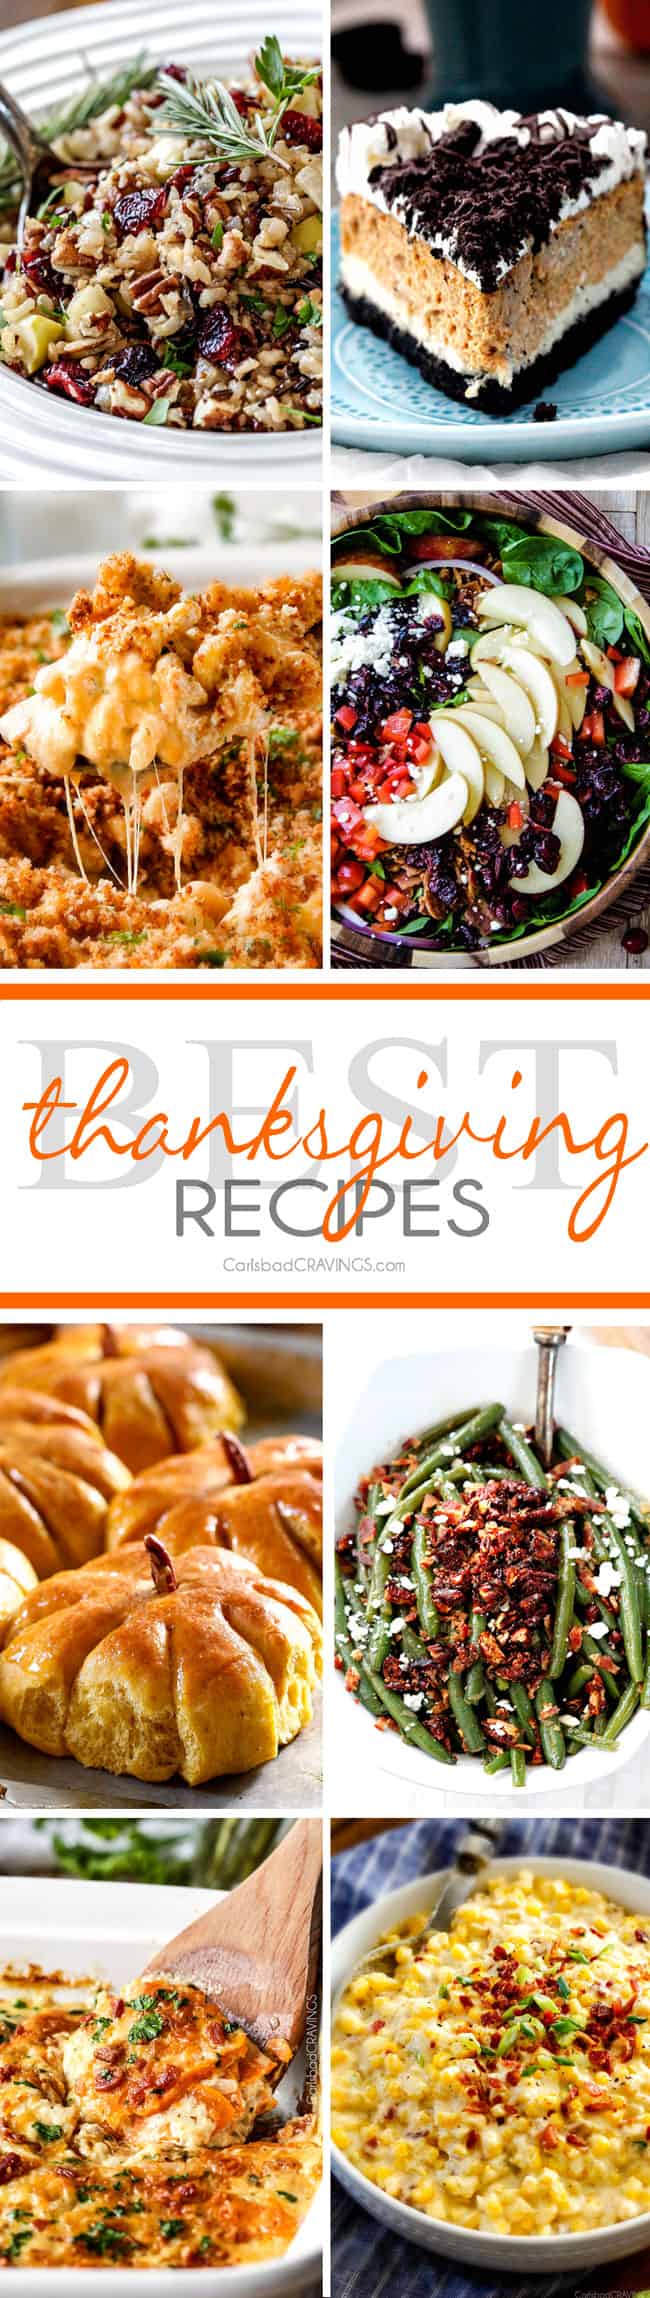 Over 75 of the BEST Thanksgiving Recipes all in ONE spot!